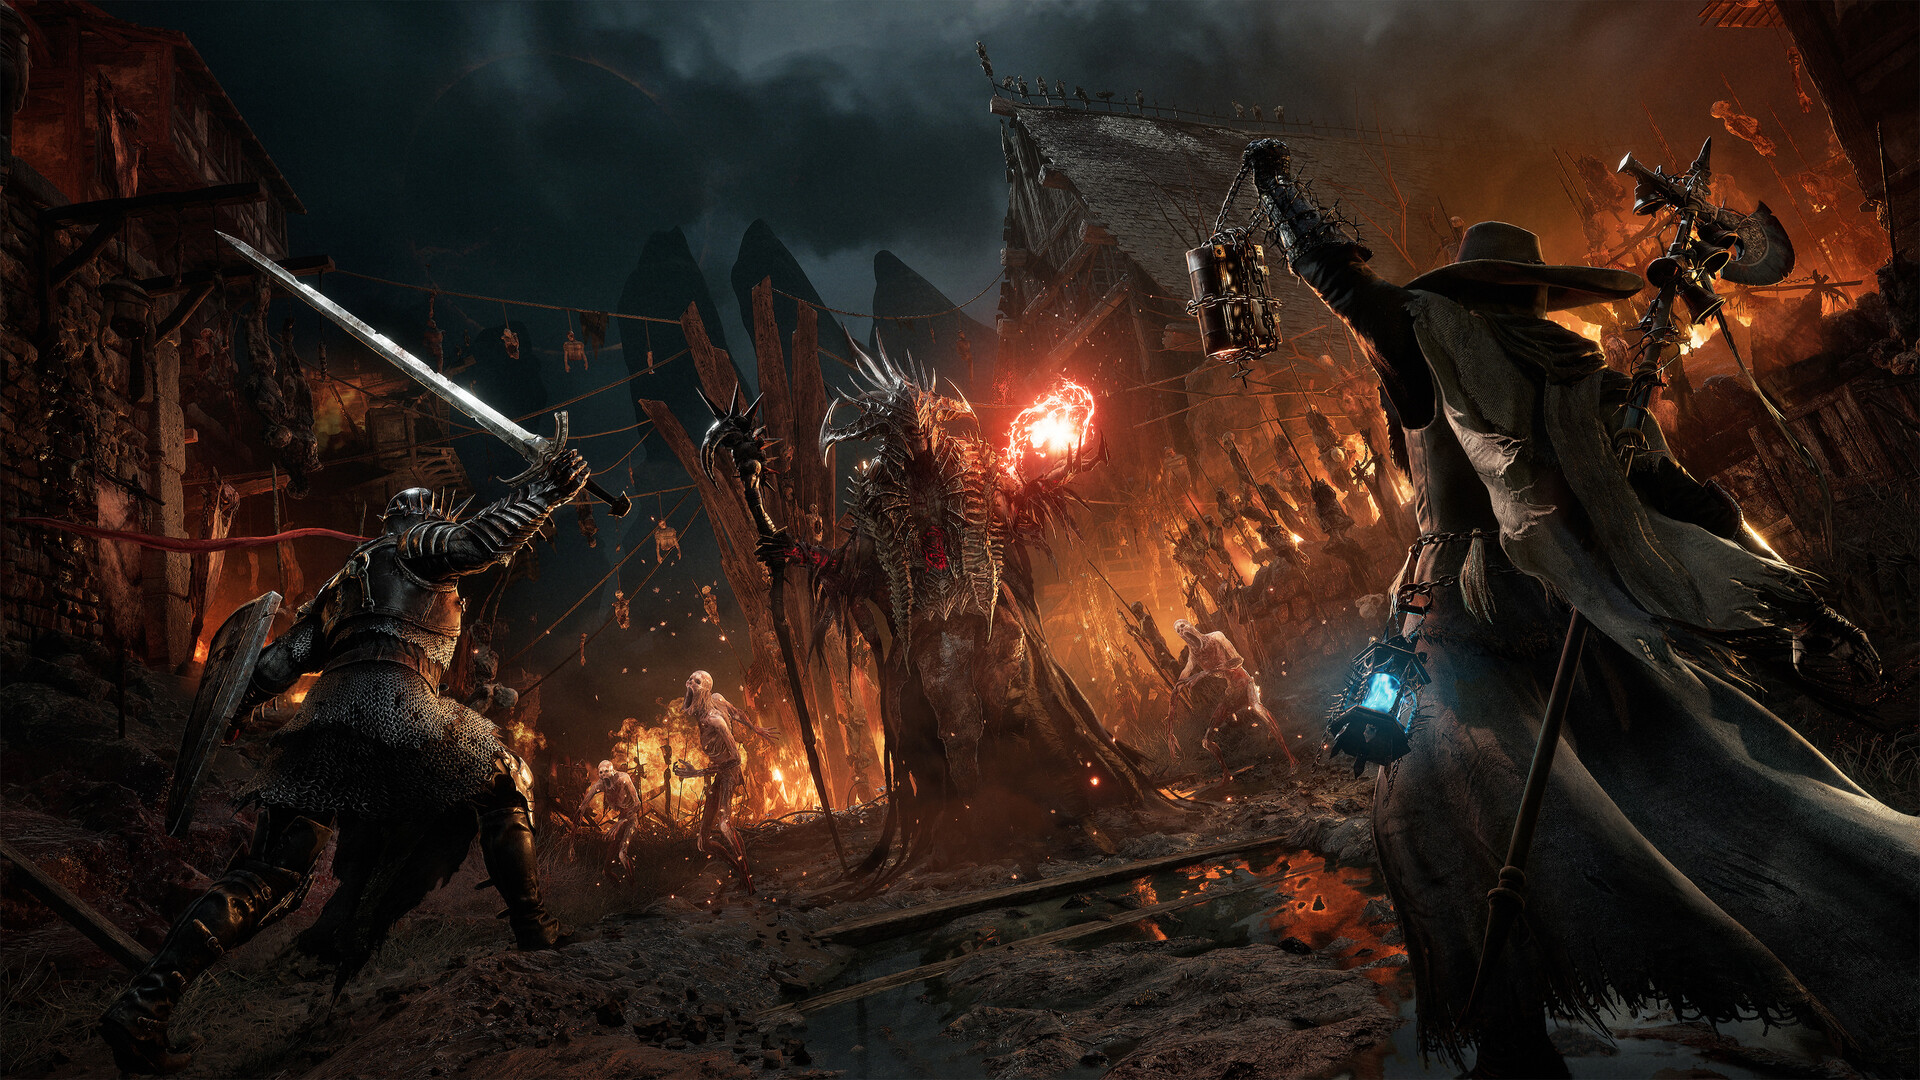 Lords of the Fallen, PC Steam Jogo